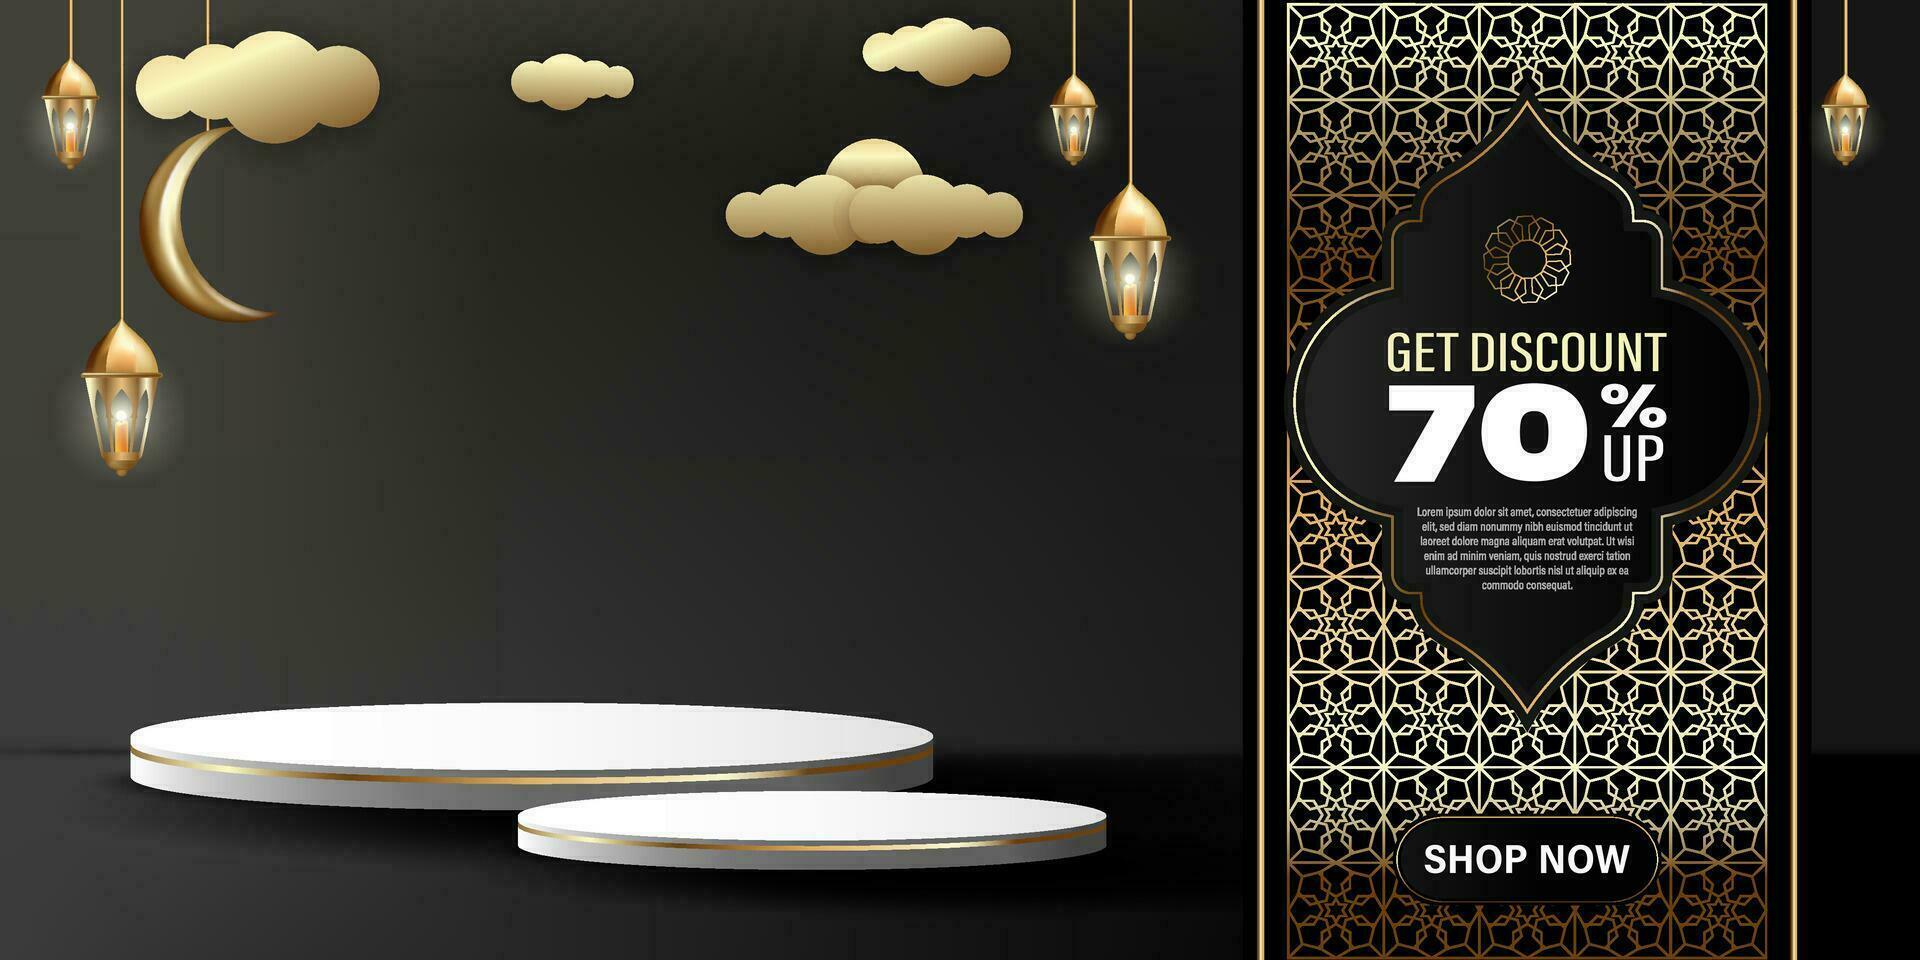 Product podium set banner for discount promotion. Islamic theme with luxurious gold colors vector